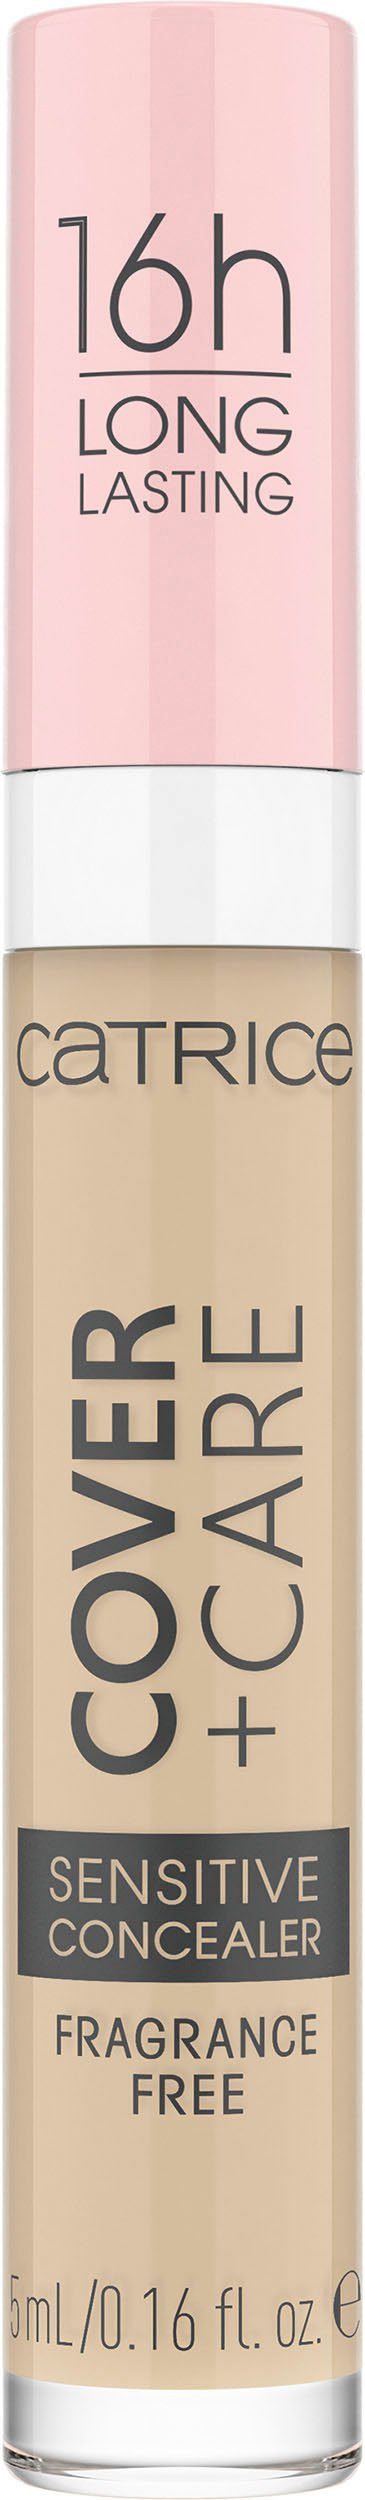 Catrice 002N 3-tlg. nude Concealer Concealer, Sensitive Care Cover Catrice +